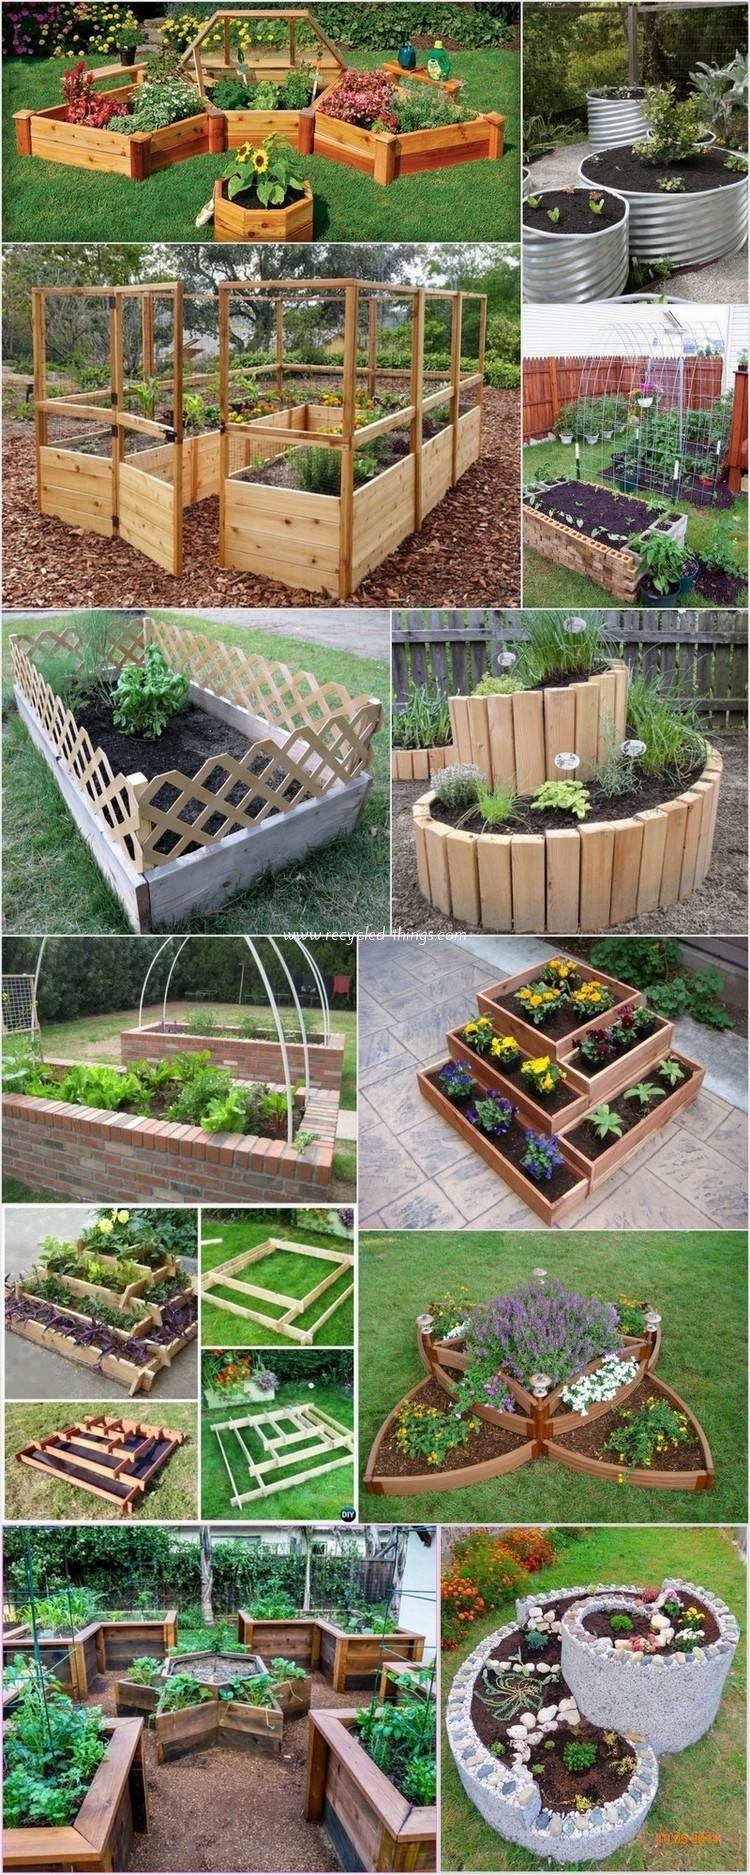 10 Stylish Inexpensive Raised Garden Bed Ideas inexpensive raised garden bed ideas to increase the value of your 2022